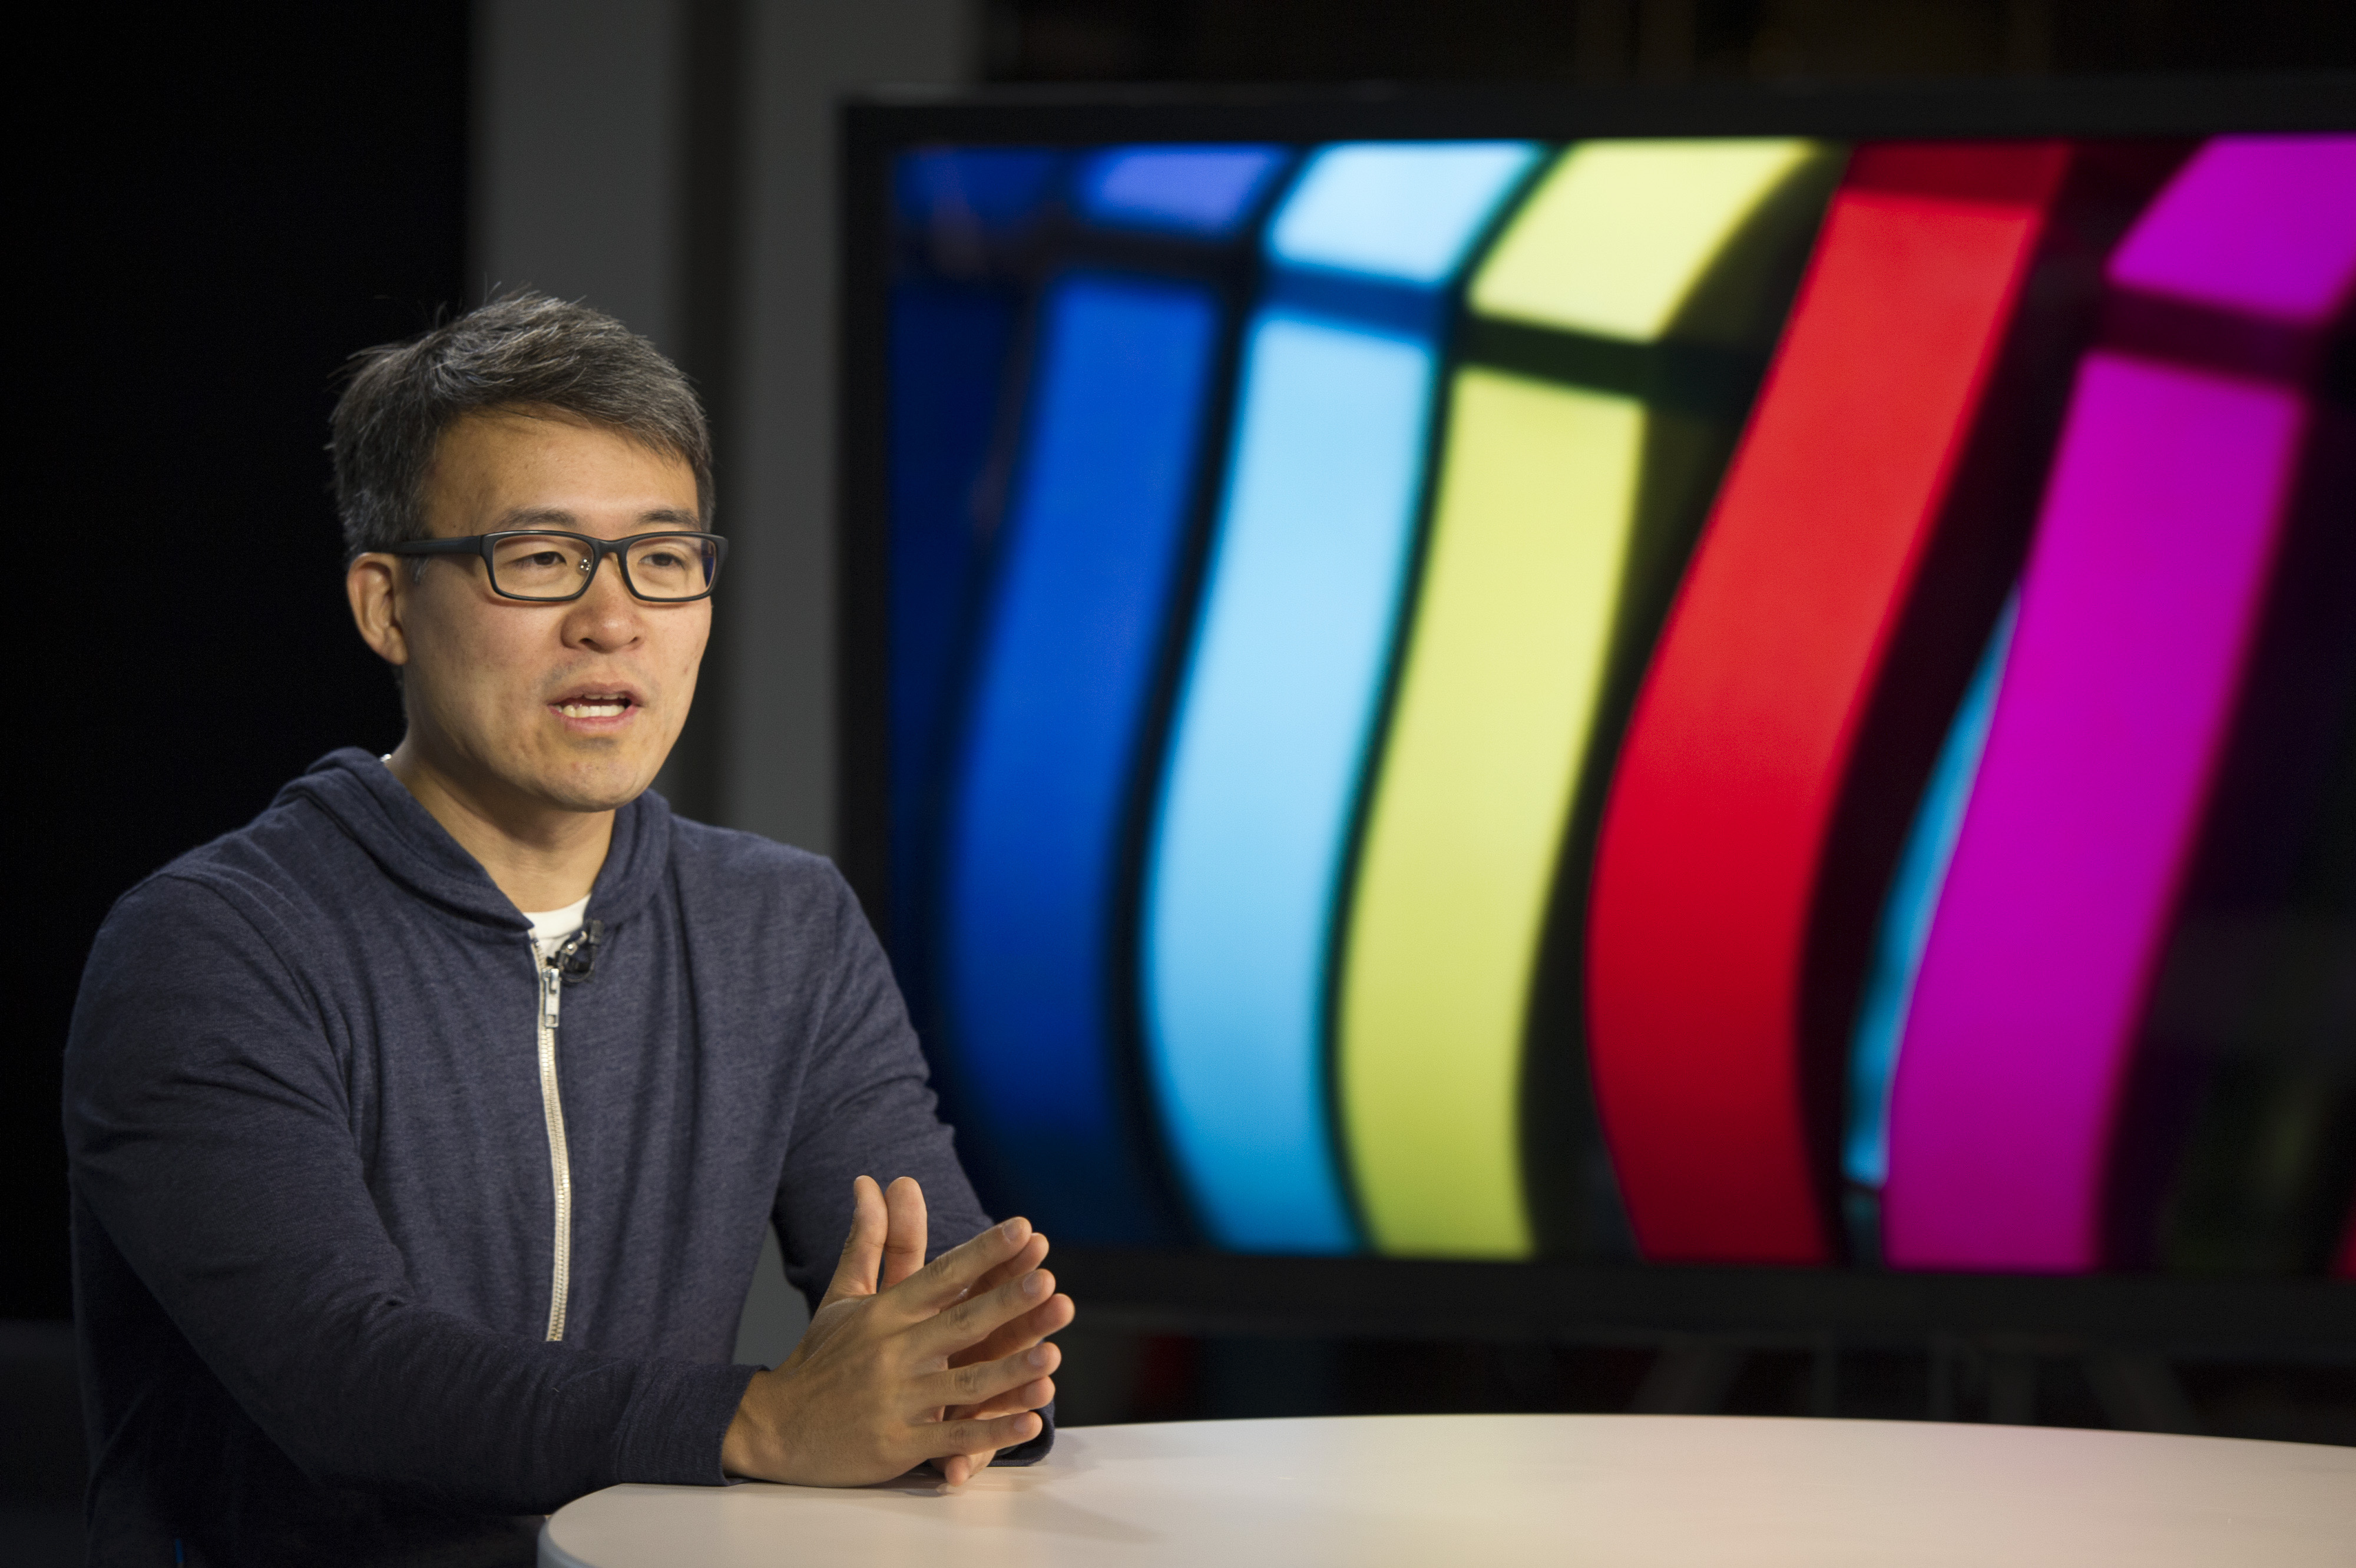 James Park, co-founder and chief executive officer of Fitbit Inc., speaks during a Bloomberg Television interview in San Francisco, California, U.S., on Friday, Aug. 22, 2014. (Bloomberg&mdash;Bloomberg via Getty Images)